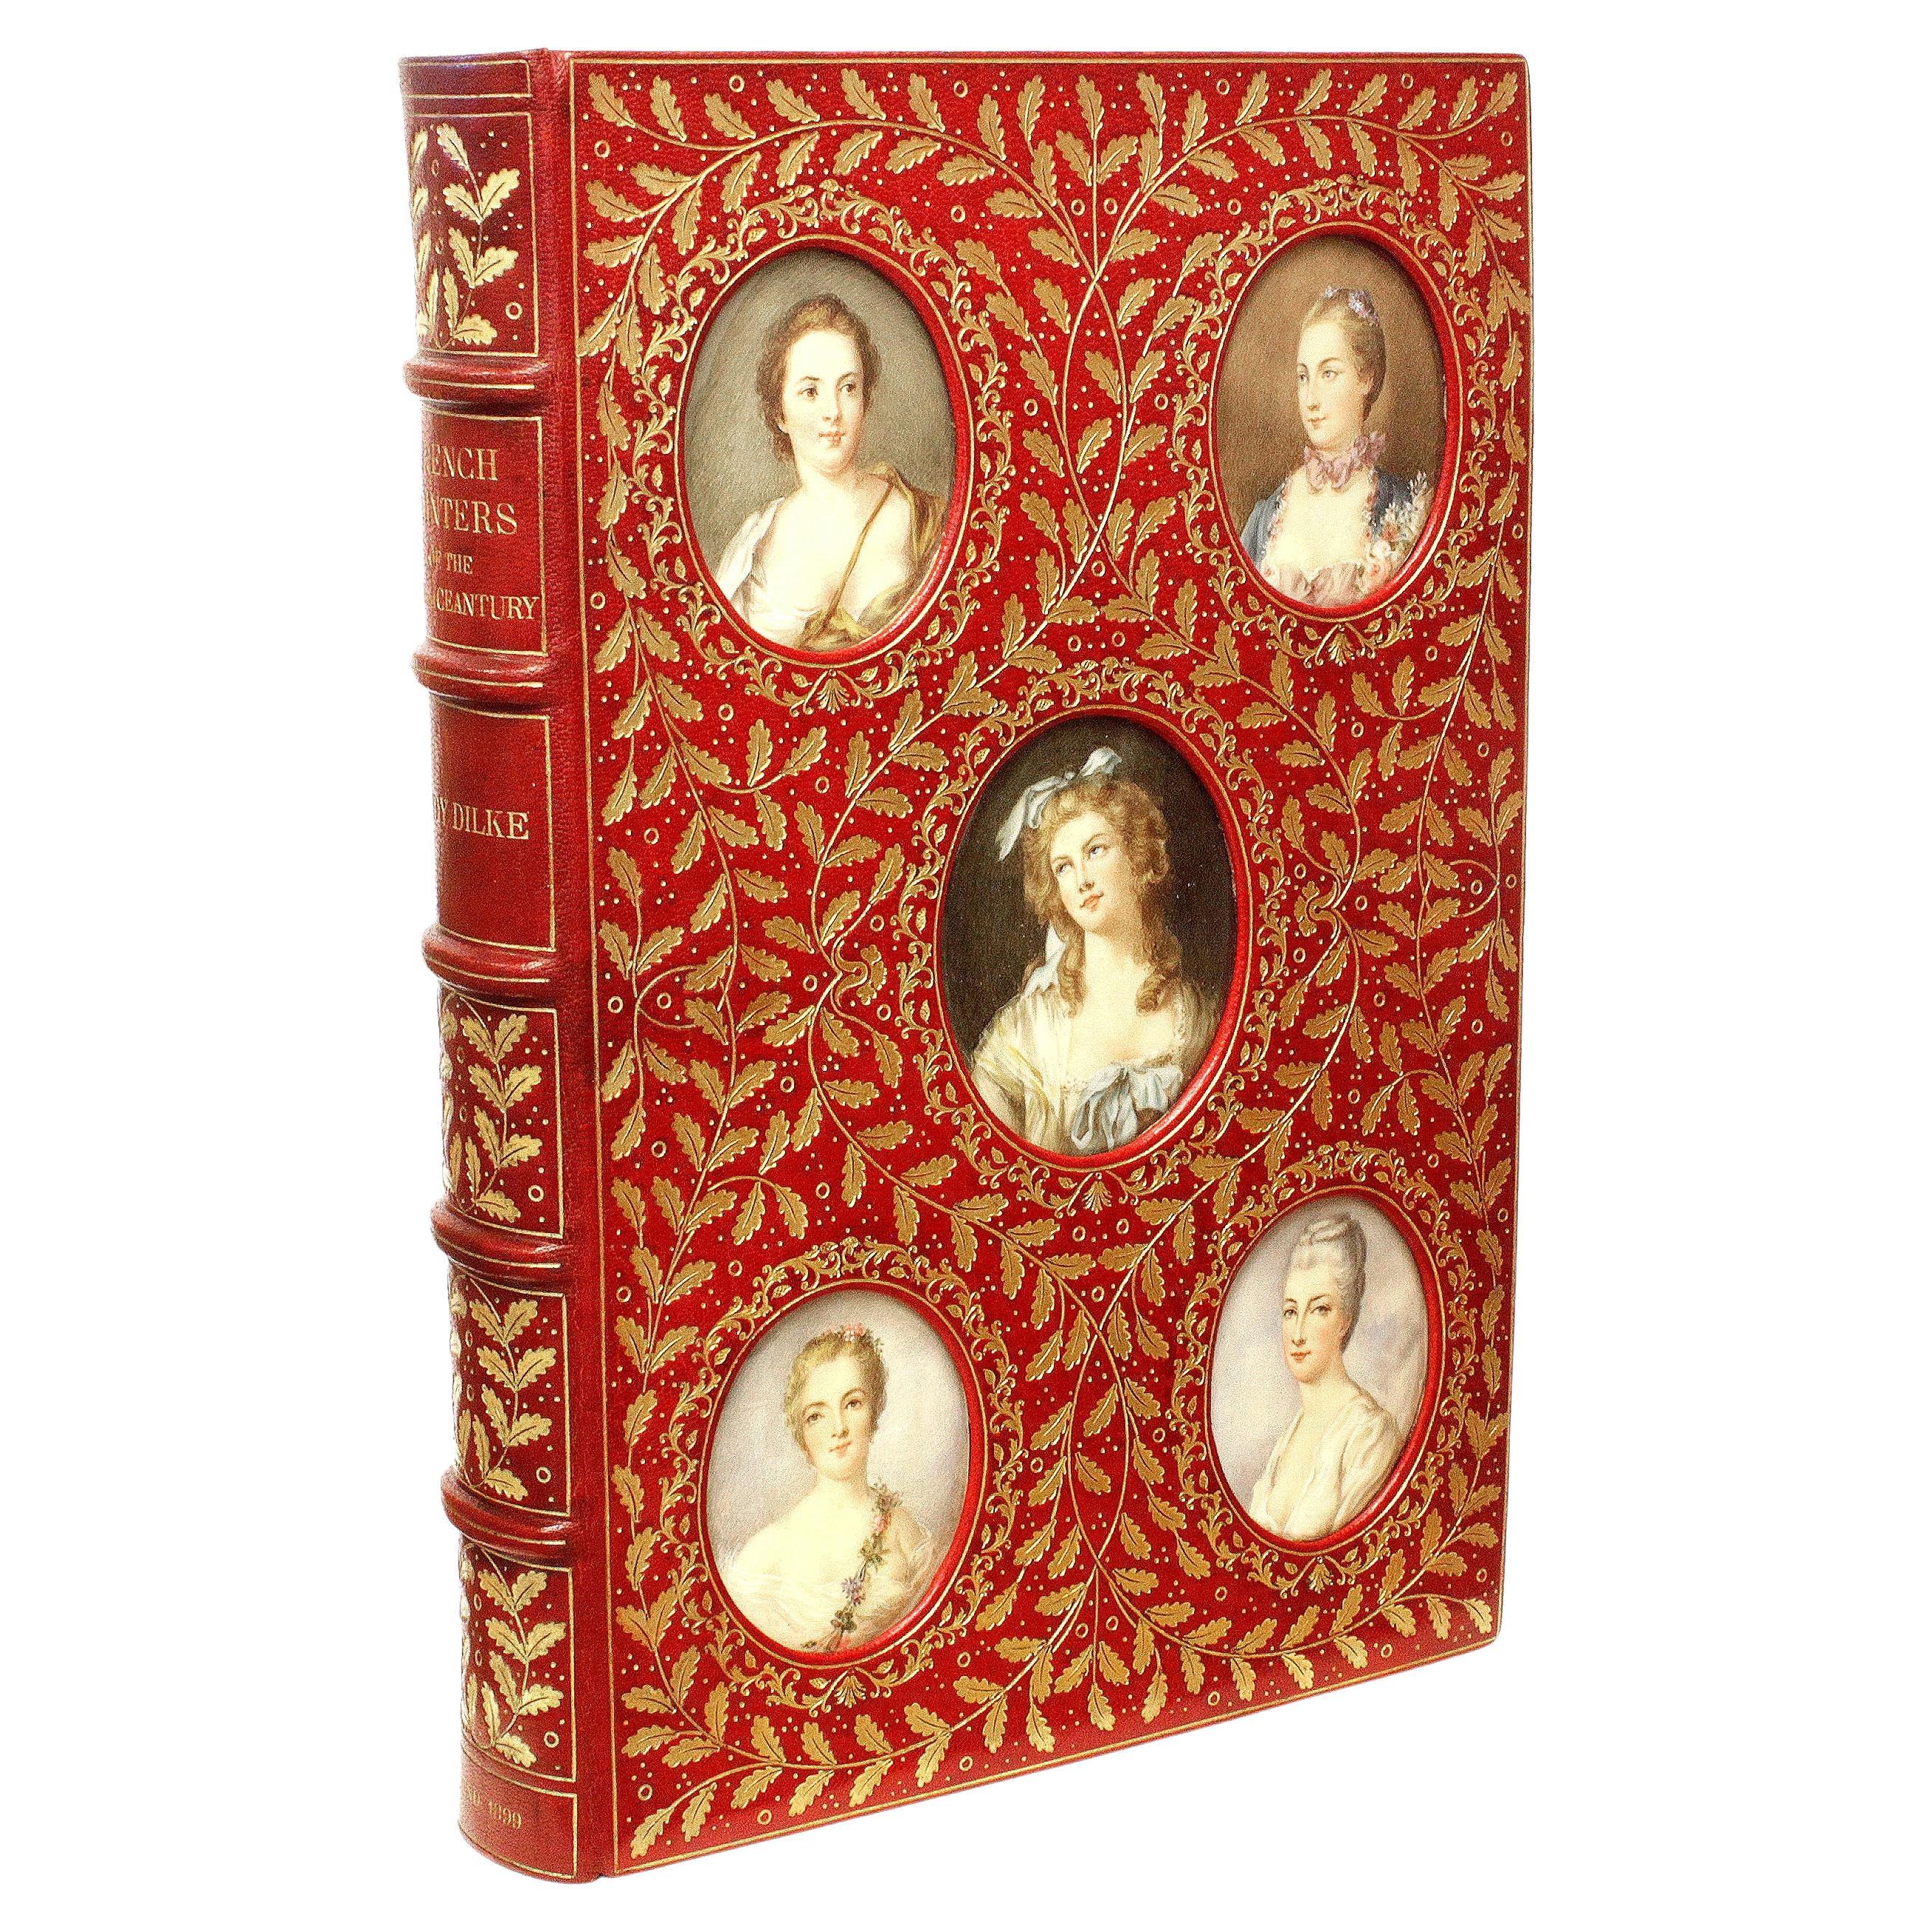 Dilke, French Painters of the 18th Century, in an Outstanding Cosway Binding